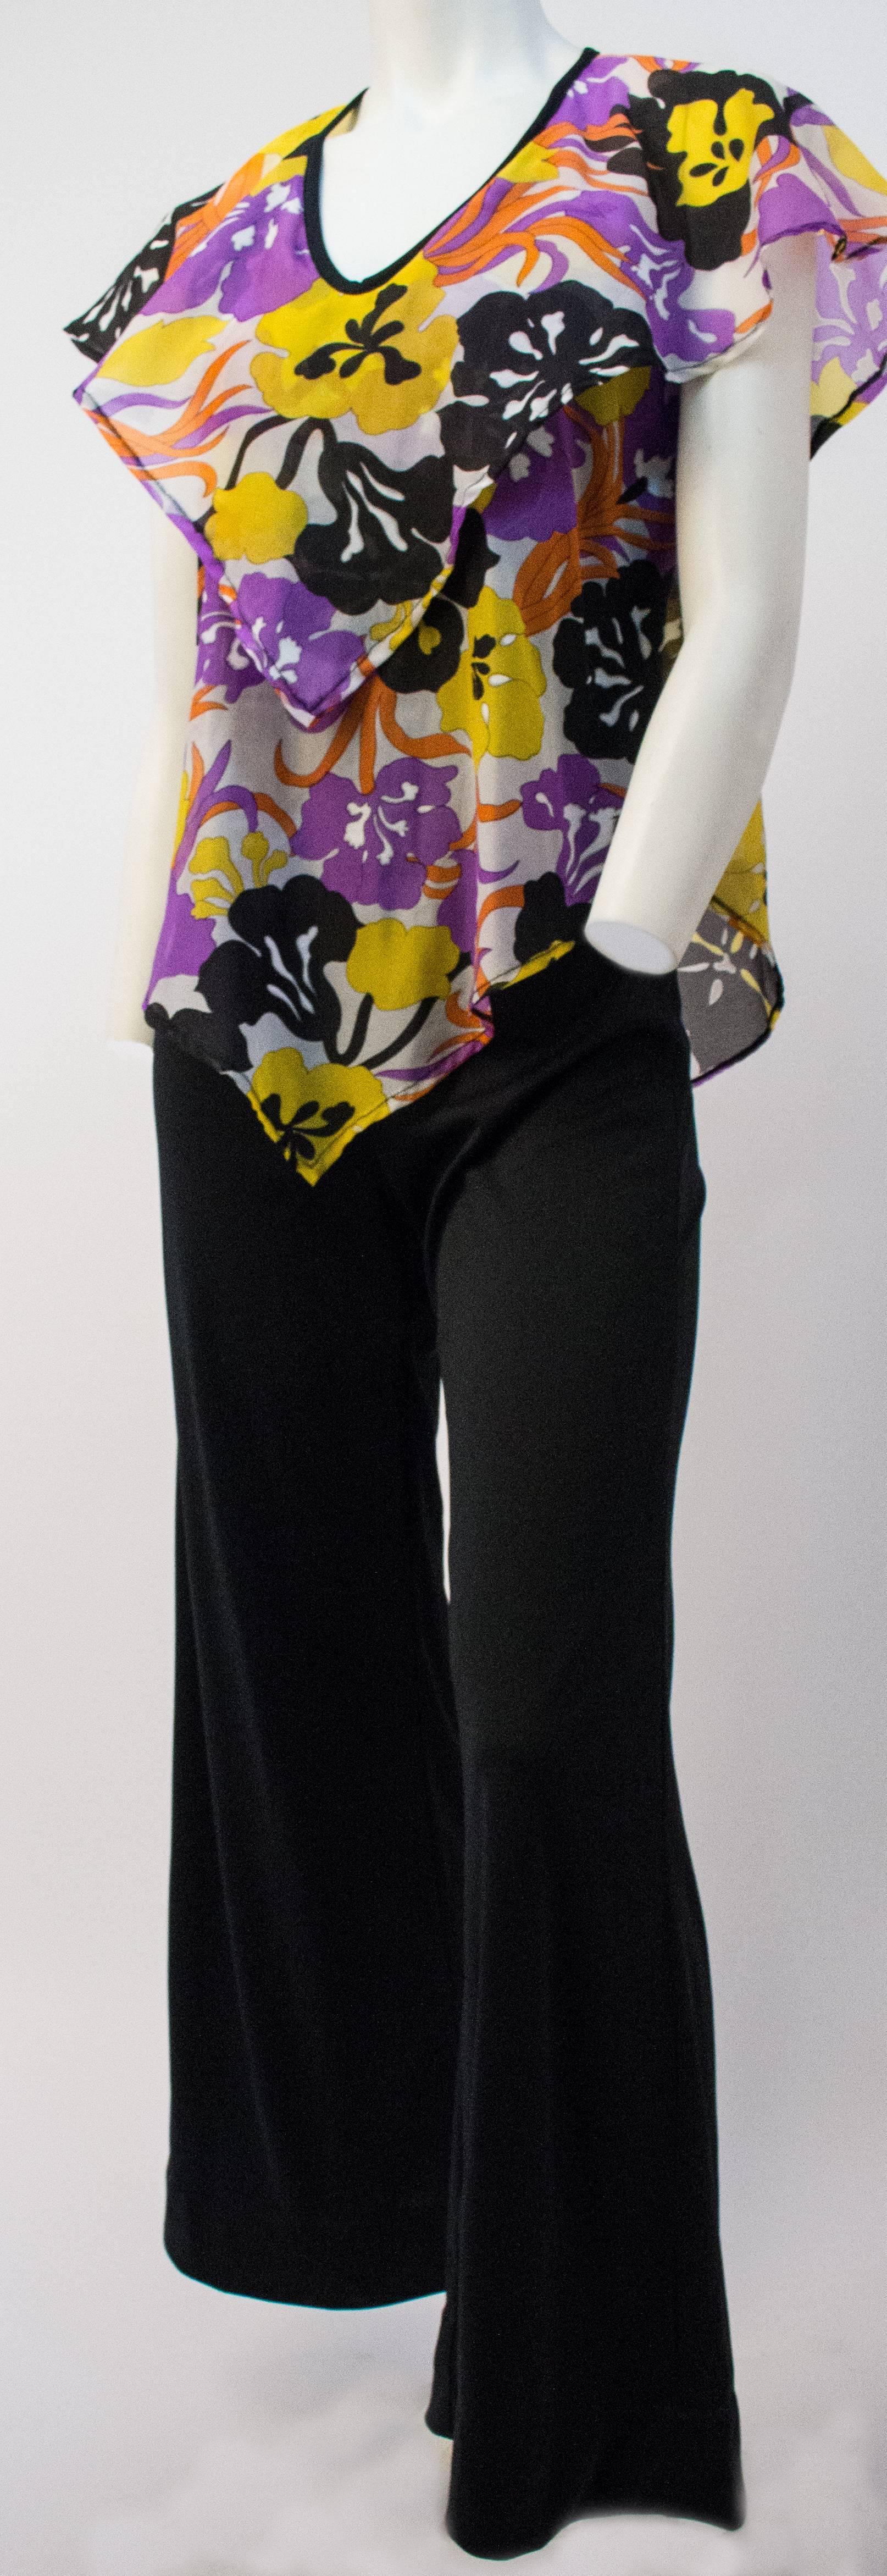 70s Jumpsuit w/ Handkerchief Top. Jersey knit flared pants w/ floral chiffon handkerchief hem bodice. Back zip closure.

Bust: 34 inches
Waist: 28 inches
Hip: 34 inches
Length: 57 inches

In our opinion it is a size small.